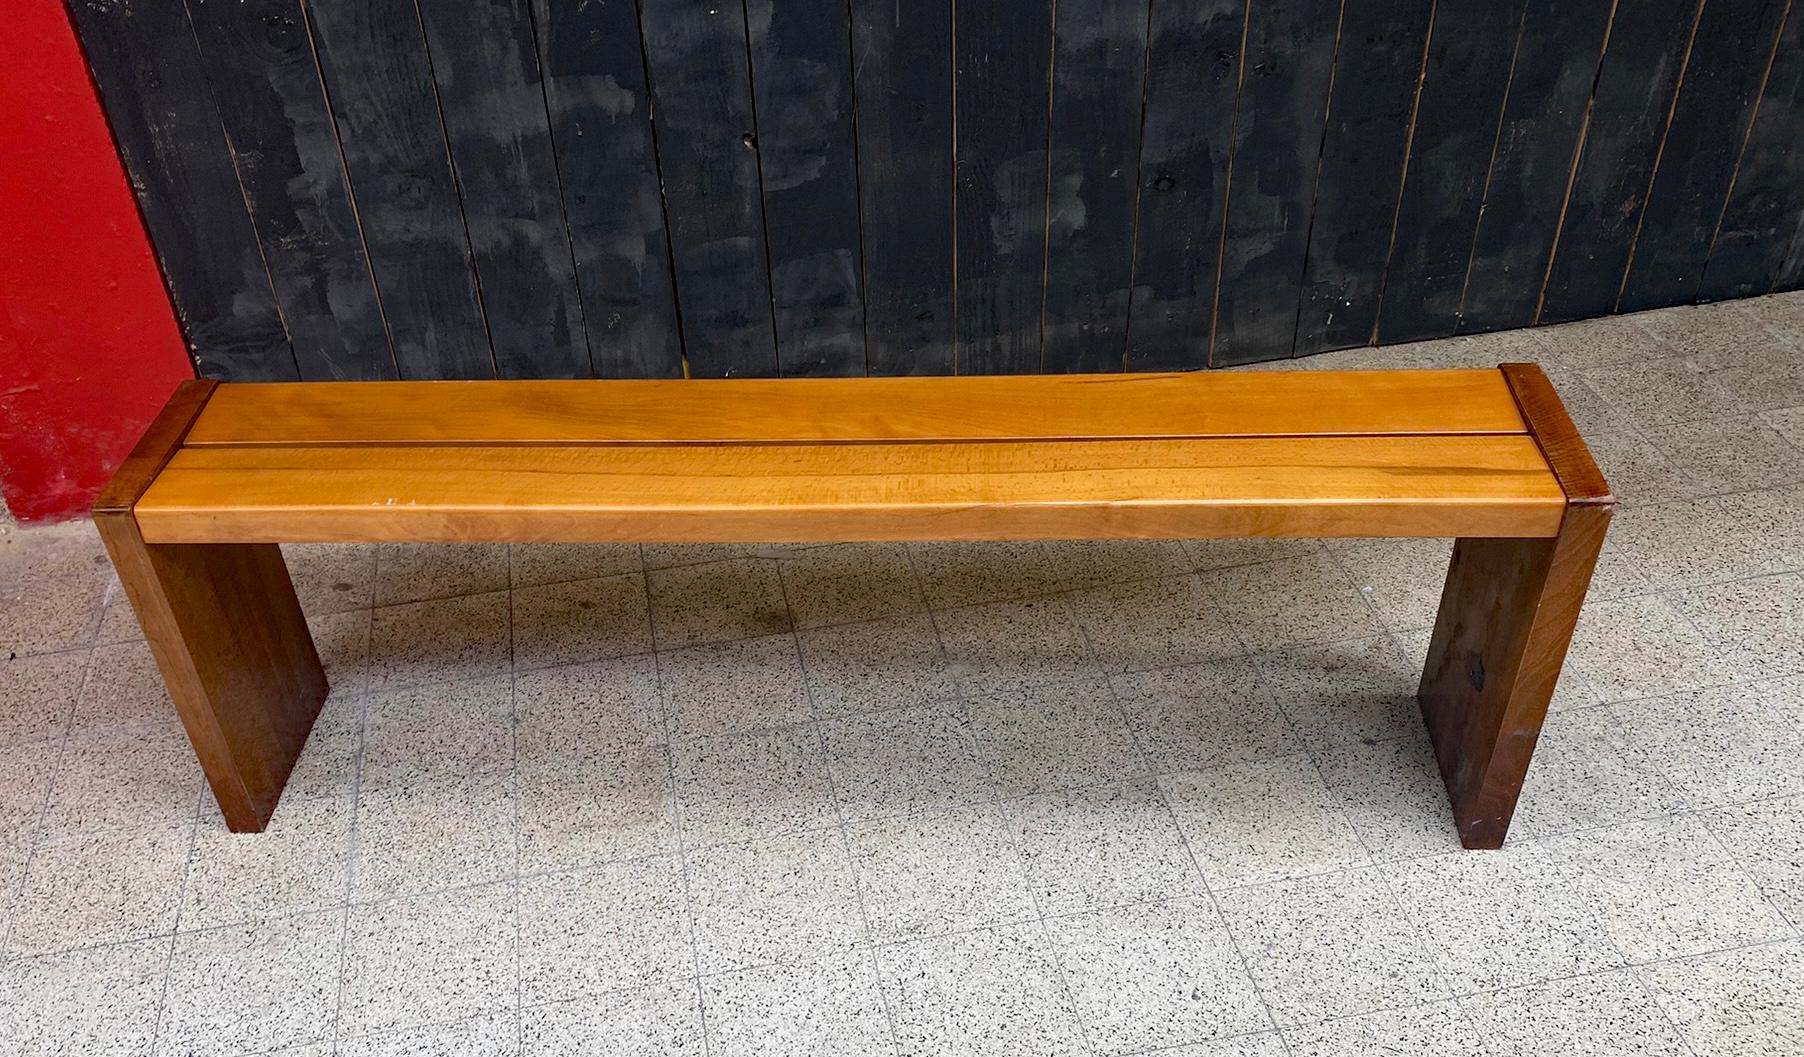 2 original stained beech benches circa 1950/1960 in the style of Charlotte Perriand, Chapo.
price is for one
two are available.